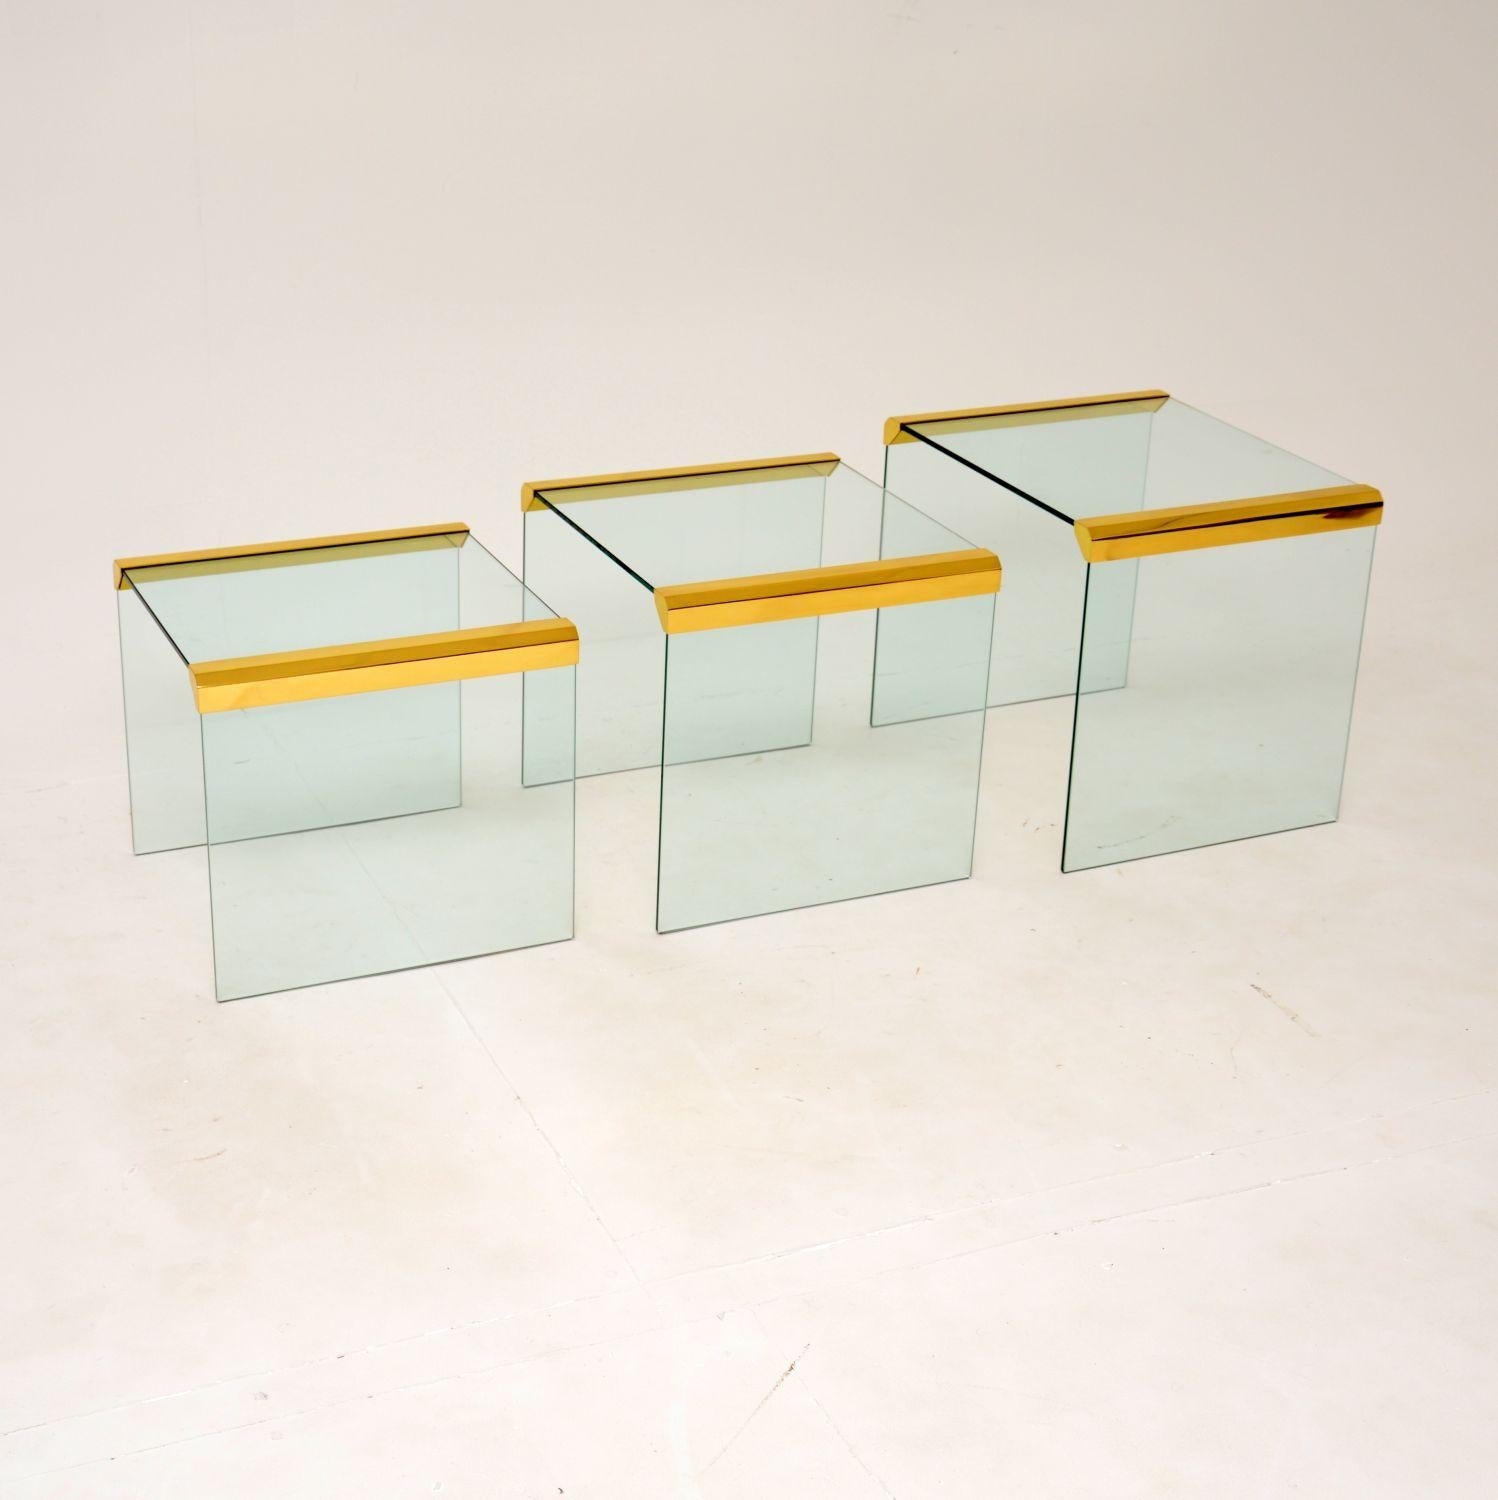 A stunning vintage nest of tables in thick toughened glass and brass. Designed by Pierangelo Gallotti for Gallotti and Radice, they were made in Italy in the 1970’s.

The quality is exceptional, they are beautifully made and in superb condition